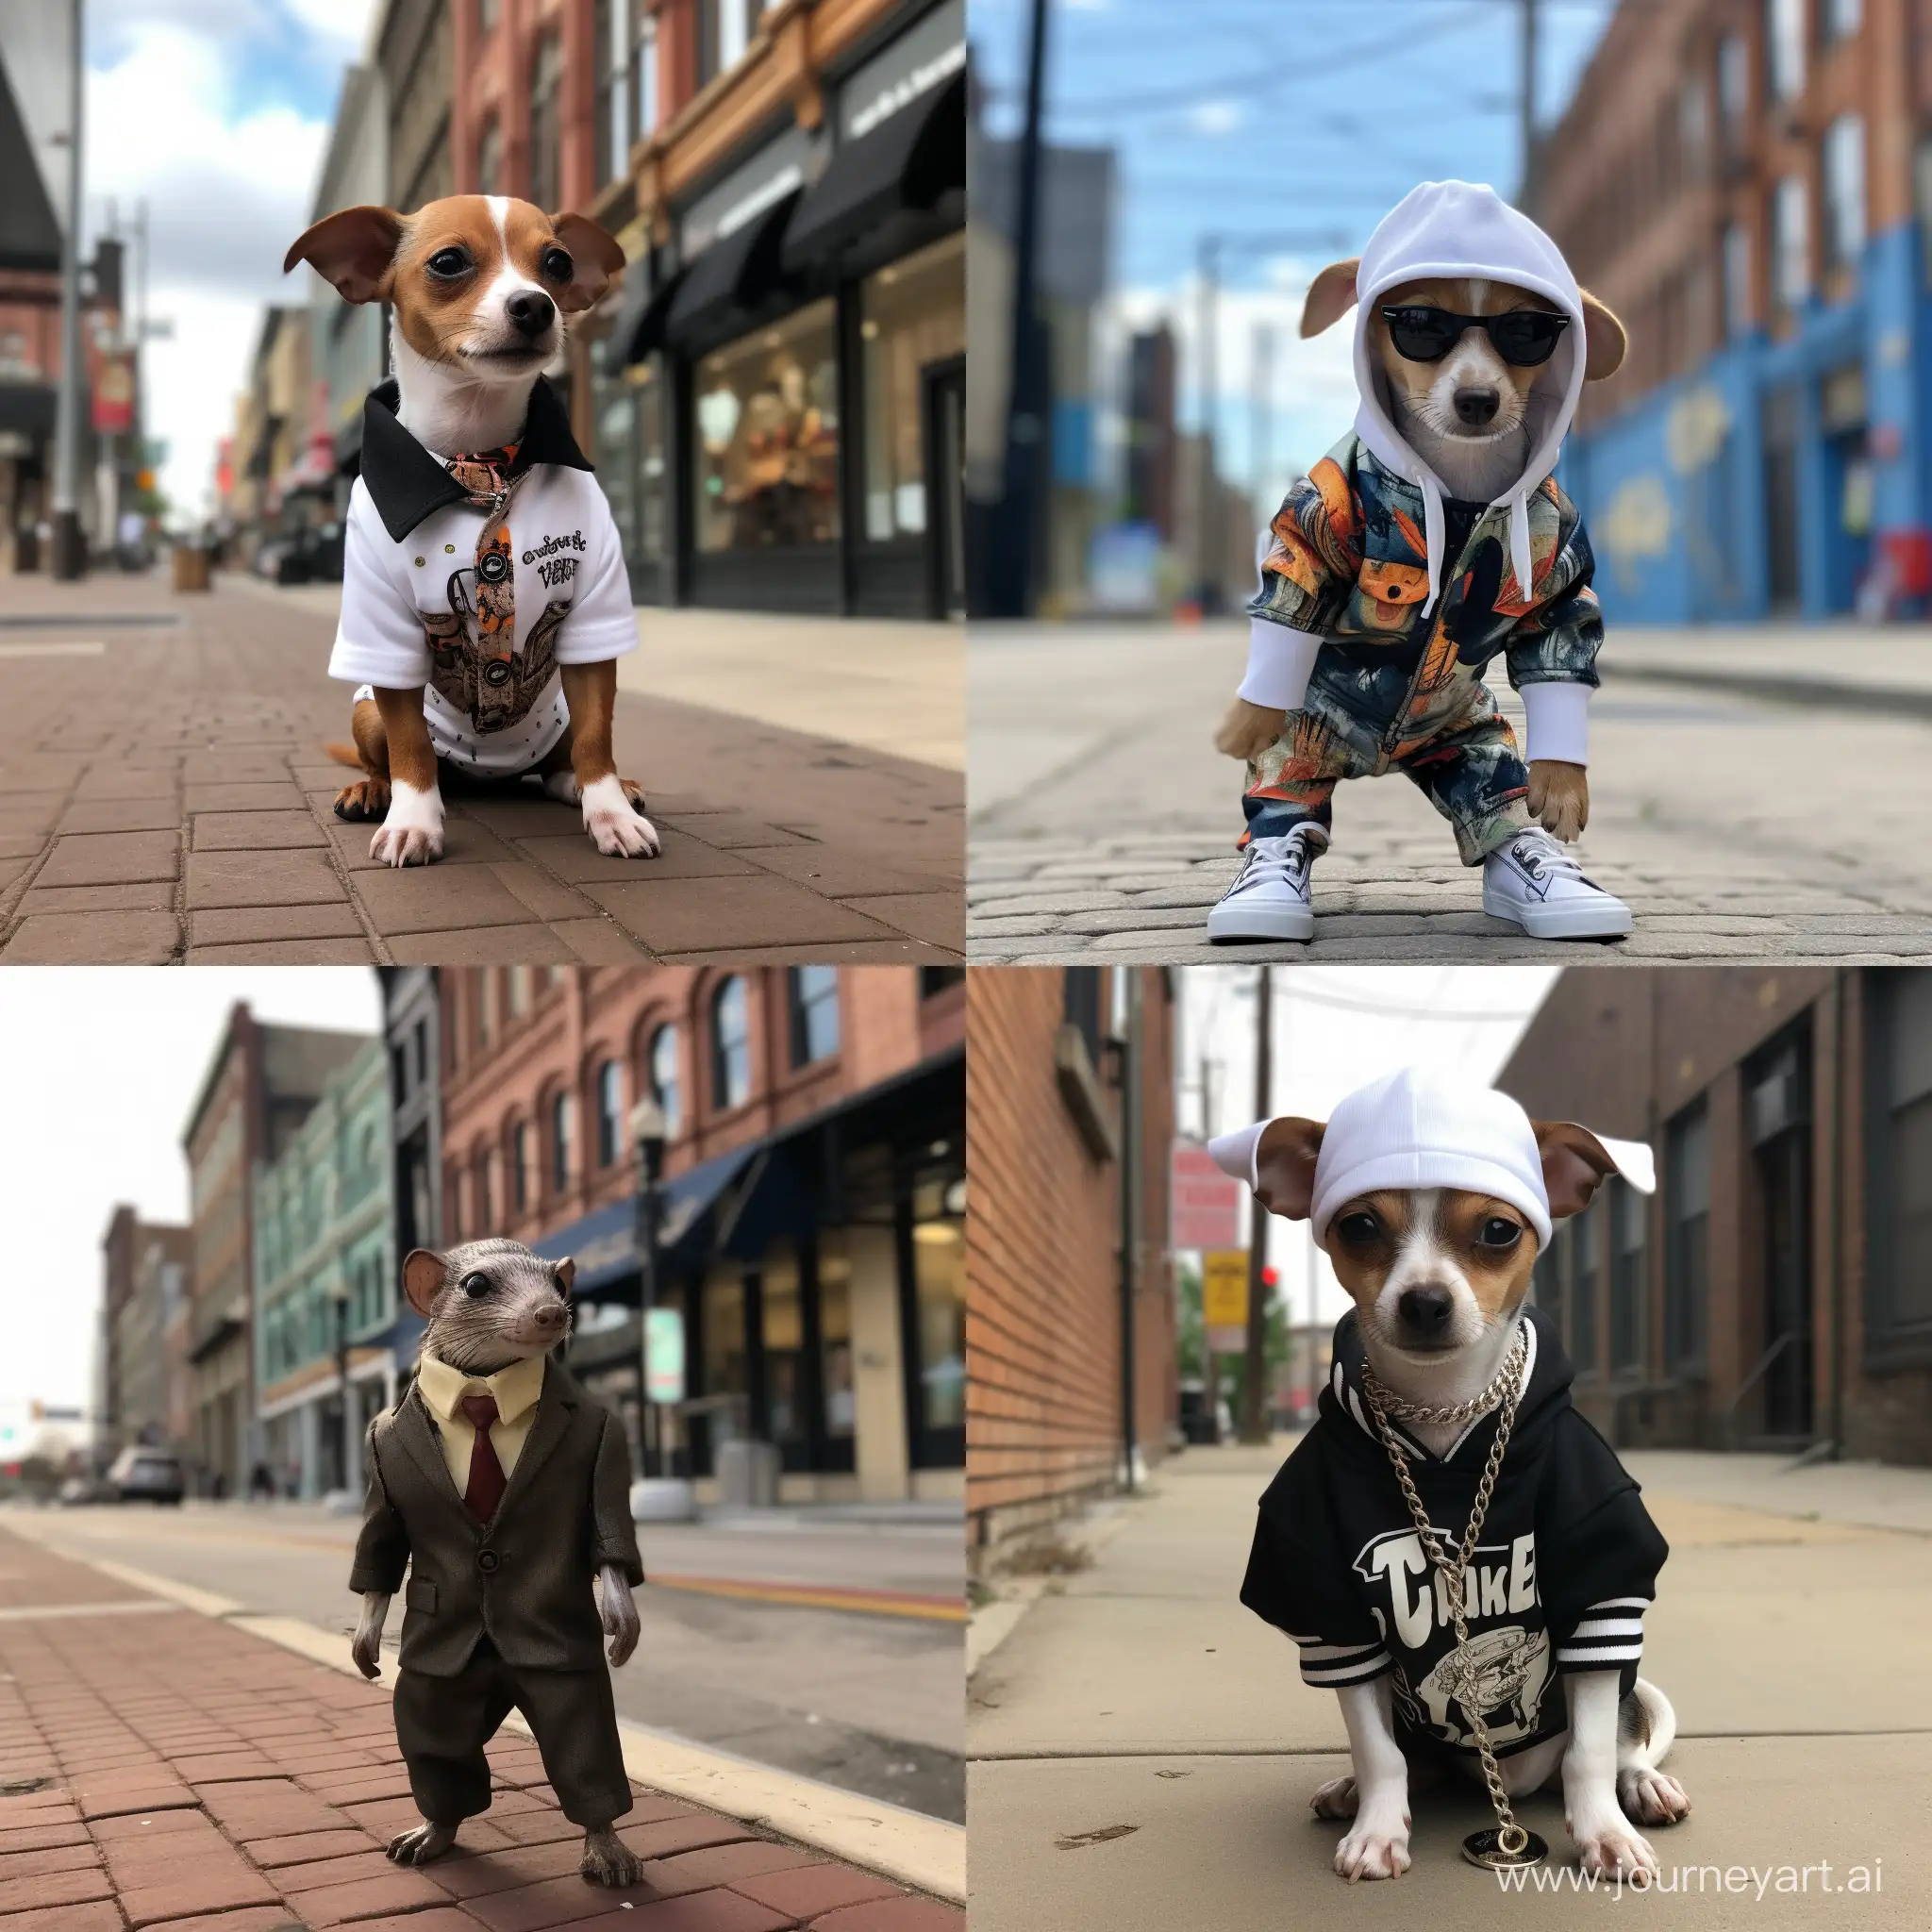 A gangster jackrussel chihuahua walking in downtown Fort Wayne Indiana